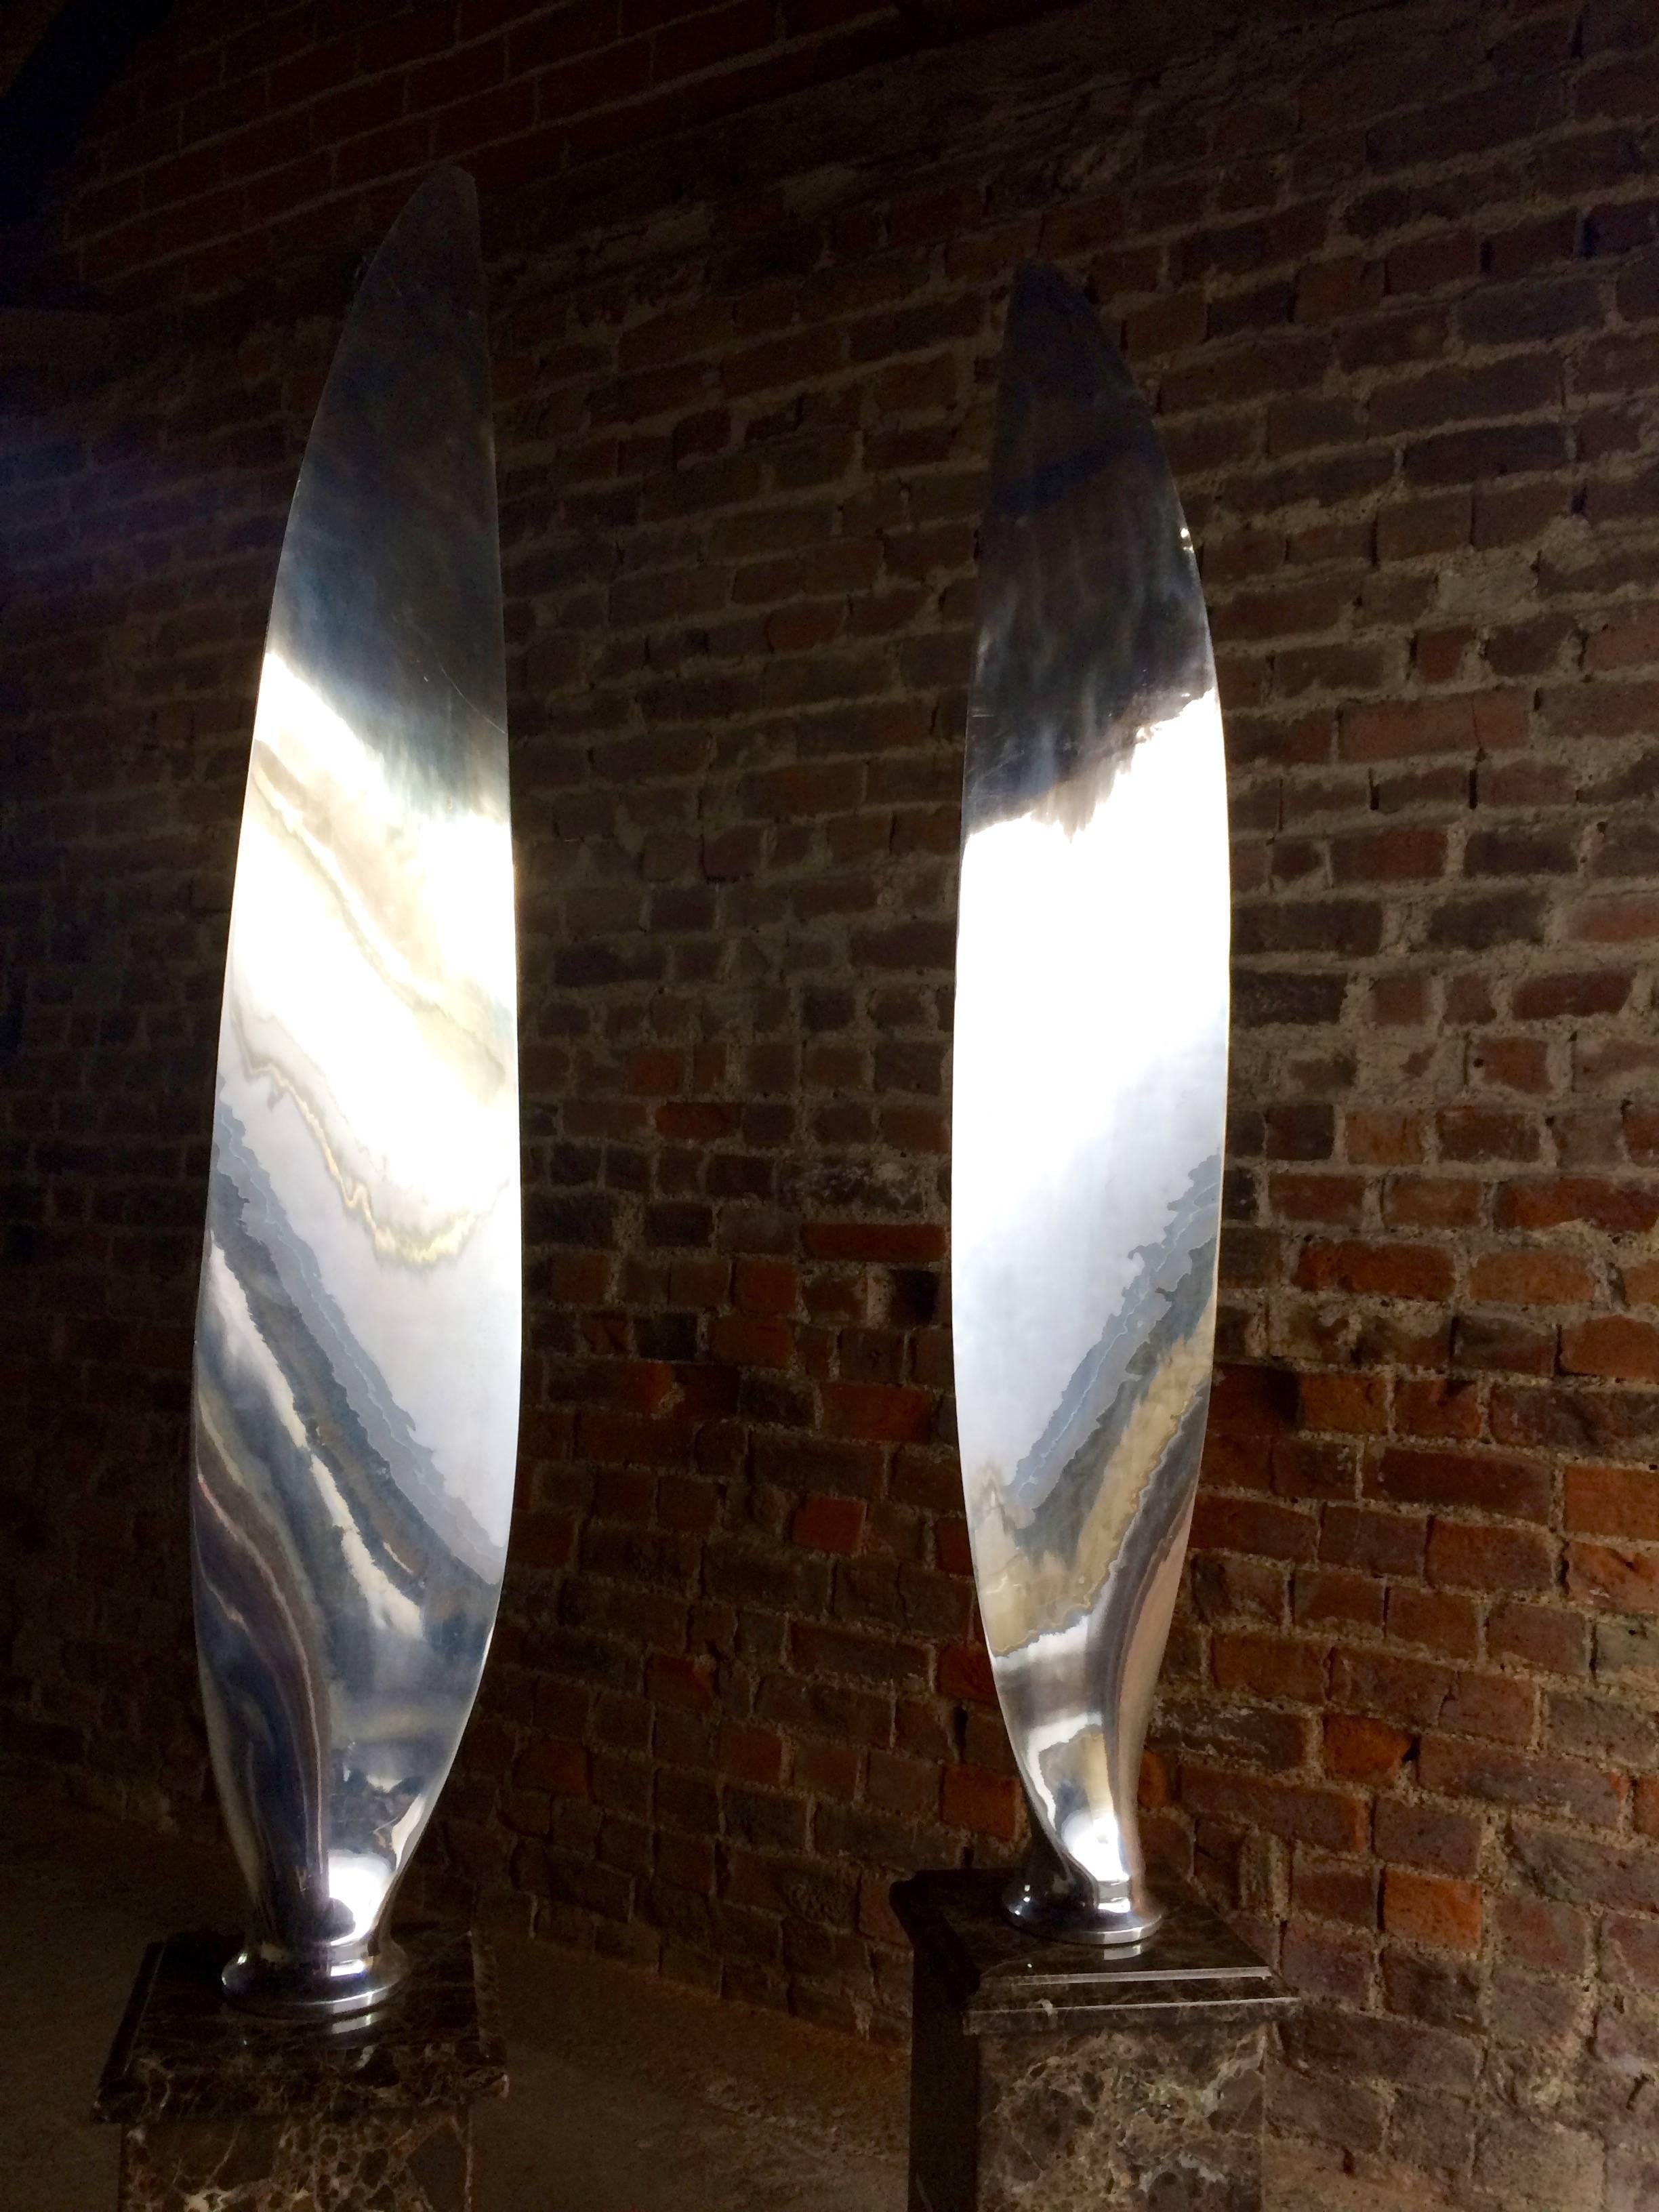 Pair of Tall Polished Chrome Airplane Propeller Blades Sculptures 2